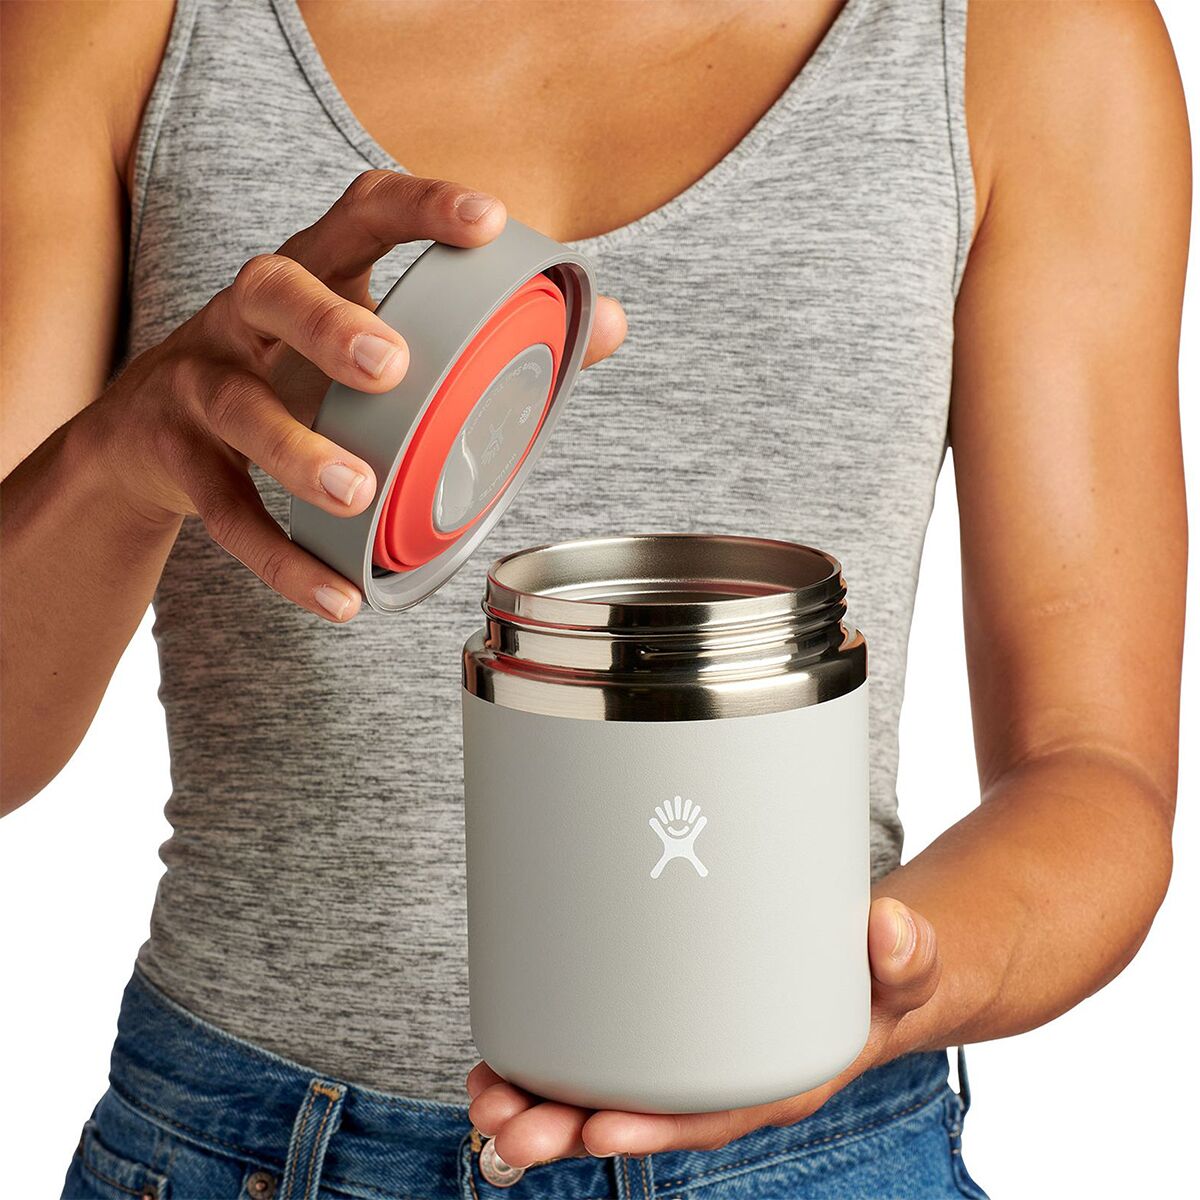 28 oz. Insulated Food Flask